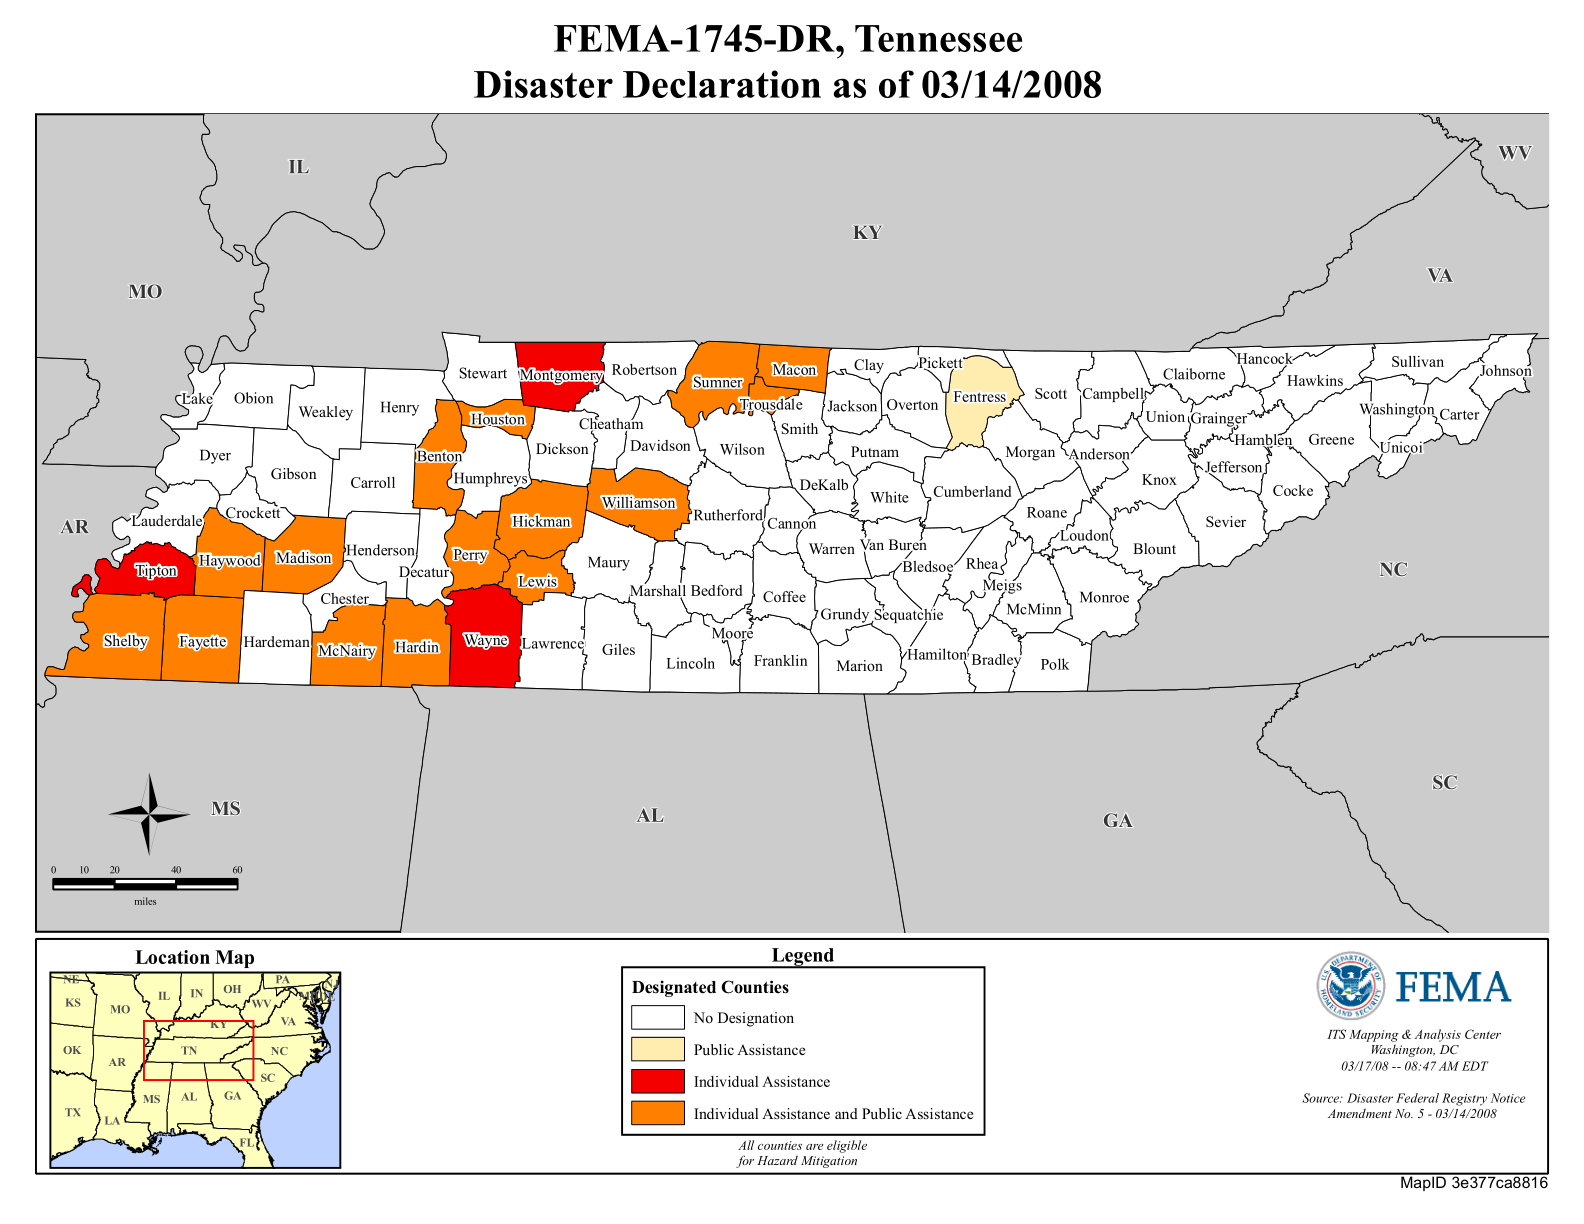 Tennessee Severe Storms, Tornadoes, Straightline Winds, And Flooding